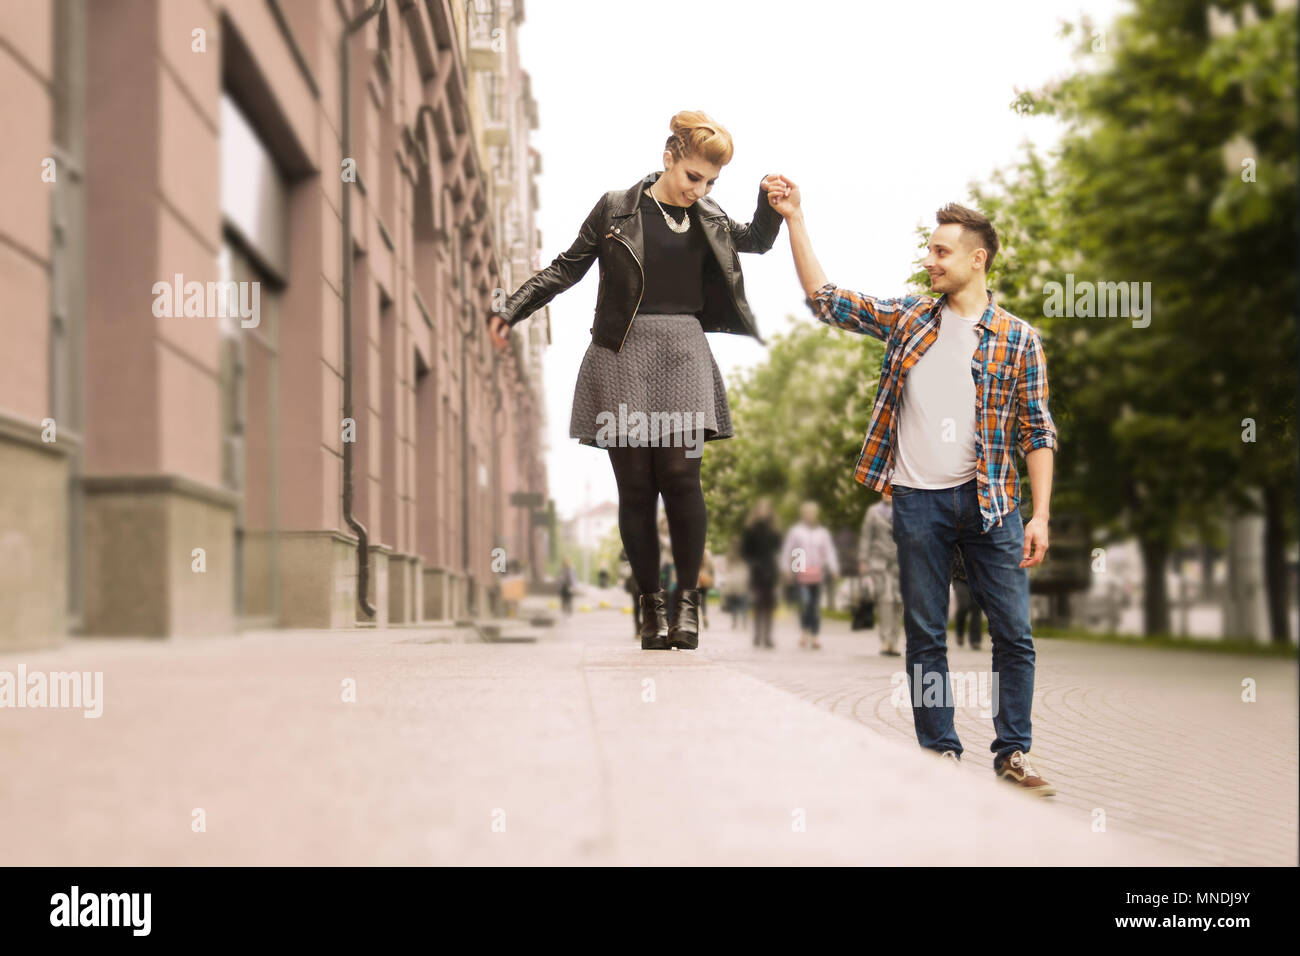 Concept d'amour:amour couple holding hands walking down the street Banque D'Images